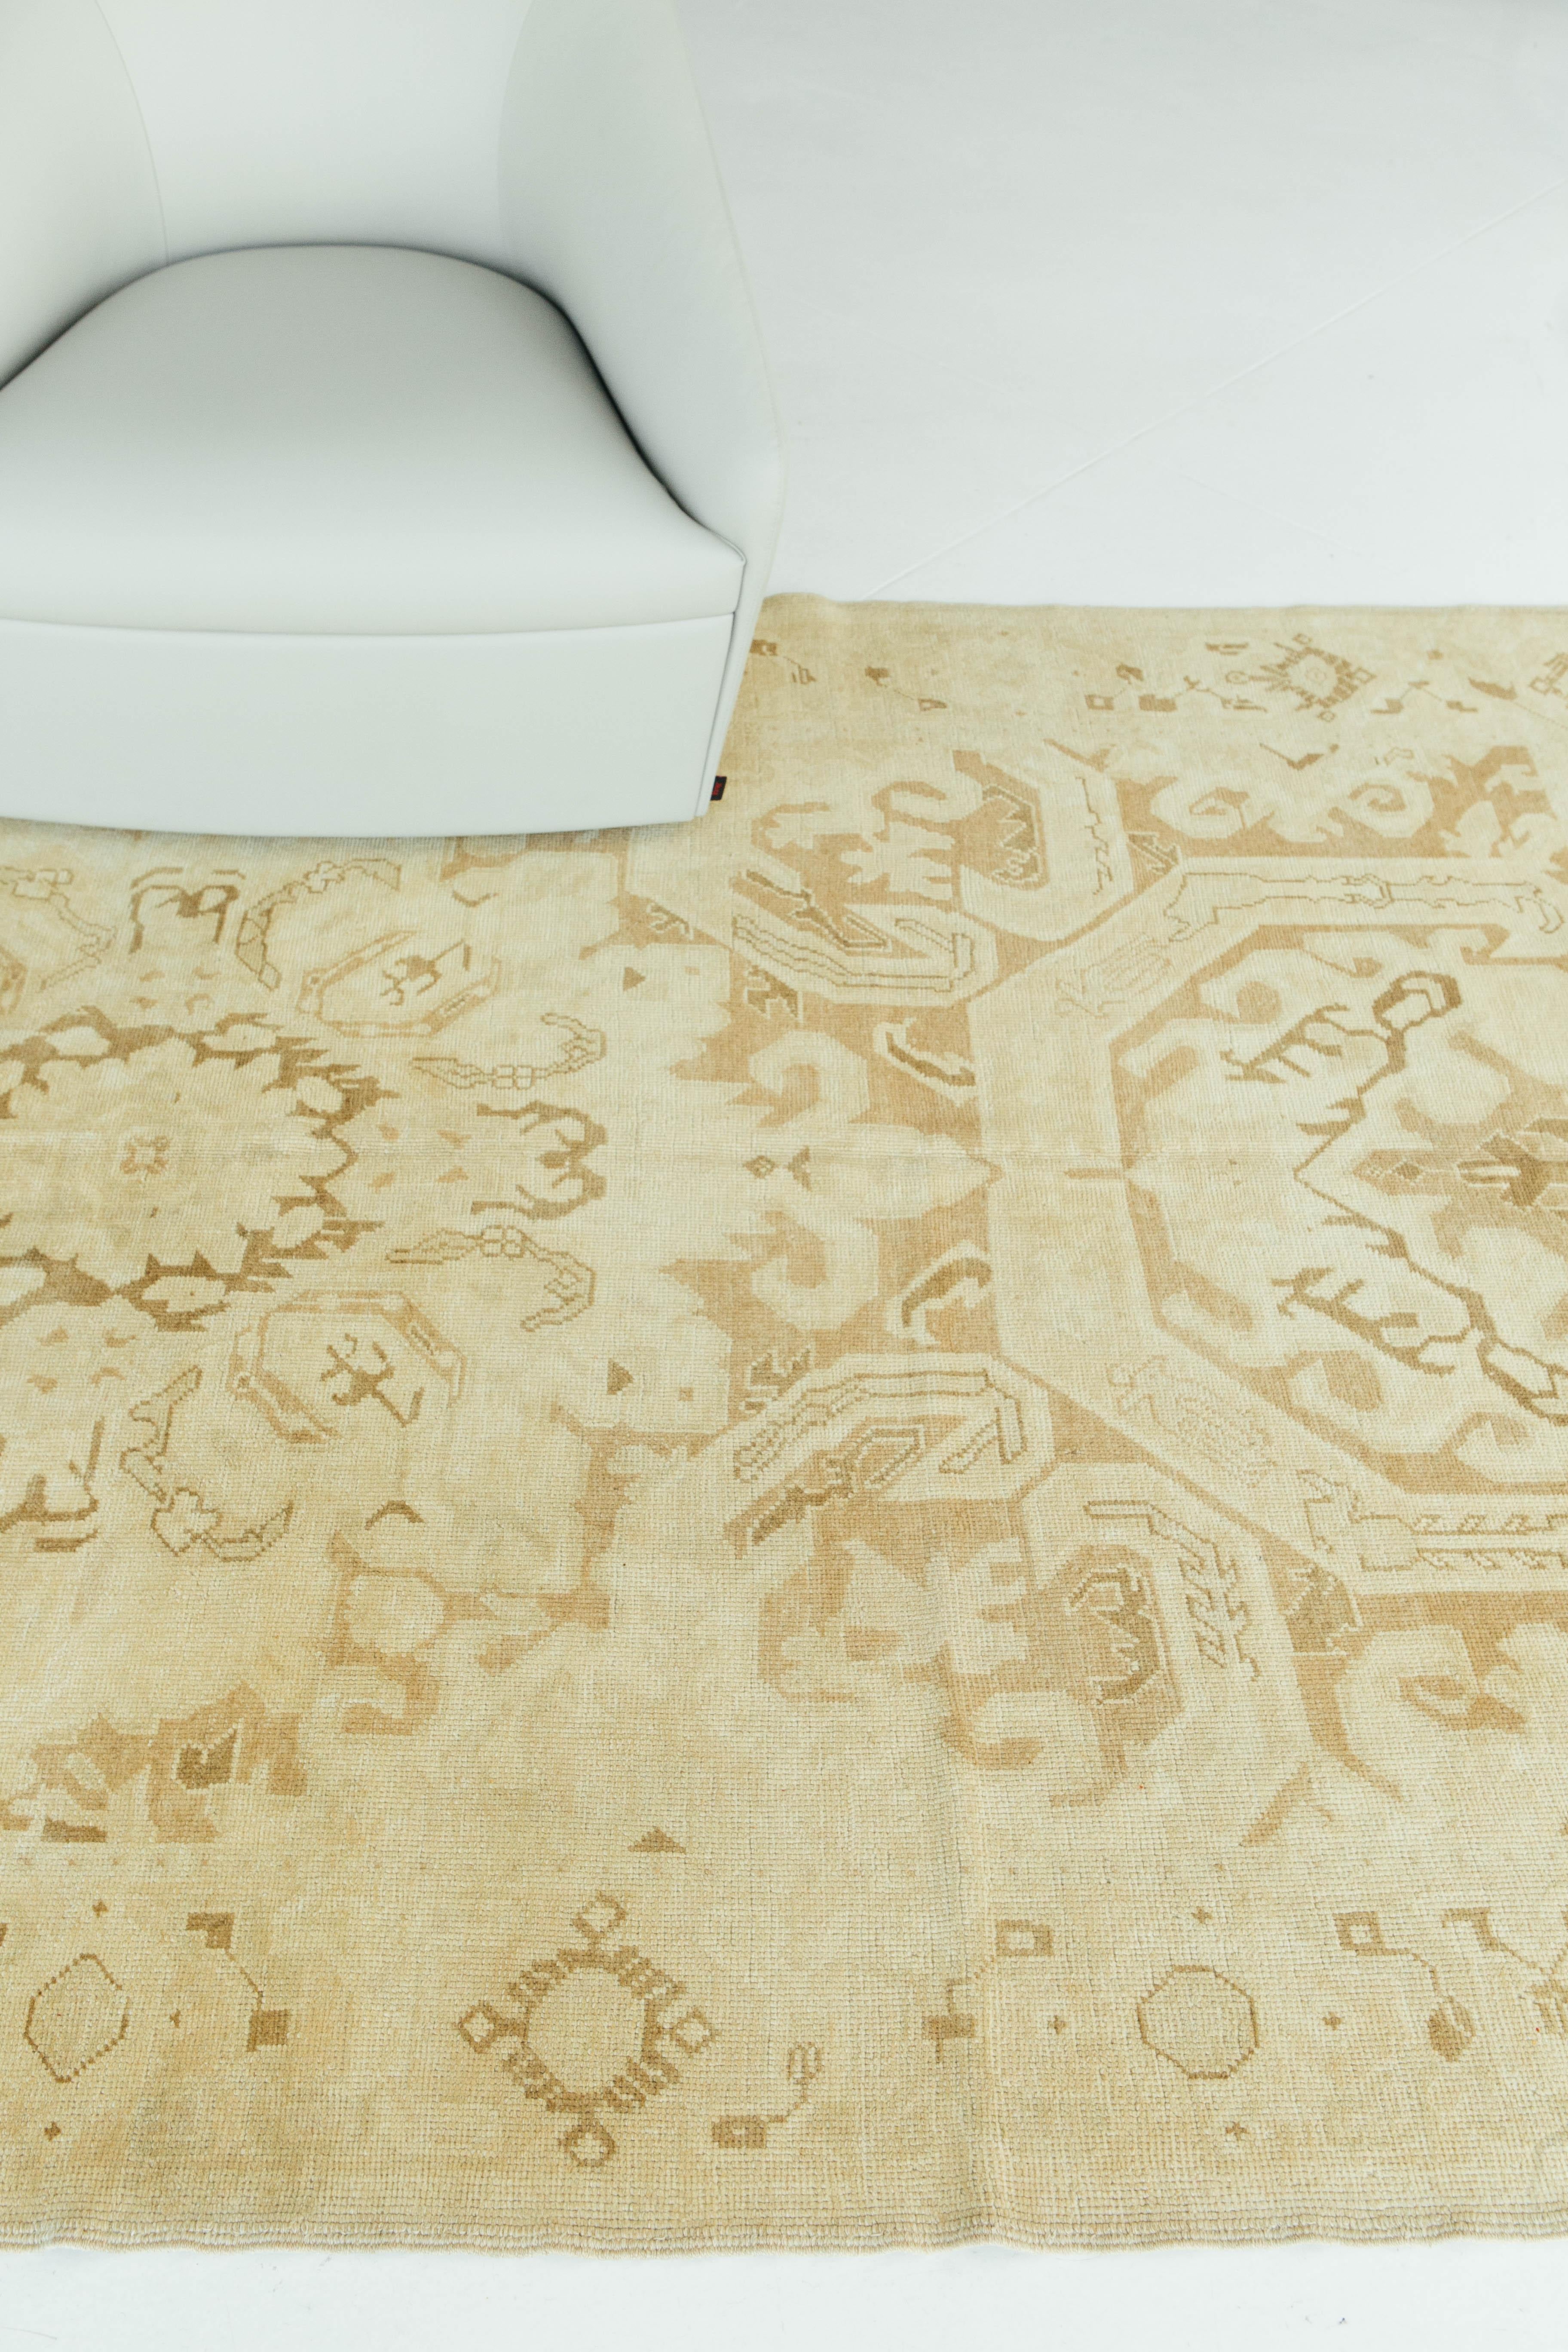 Vintage Turkish Anatolian rugs weave together dyes and colors, motifs, textures and techniques that are popular in Anatolia or Asia minor. This piece is composed with beautiful tribal work tying together symmetrical knots in ivory hues of taupe.